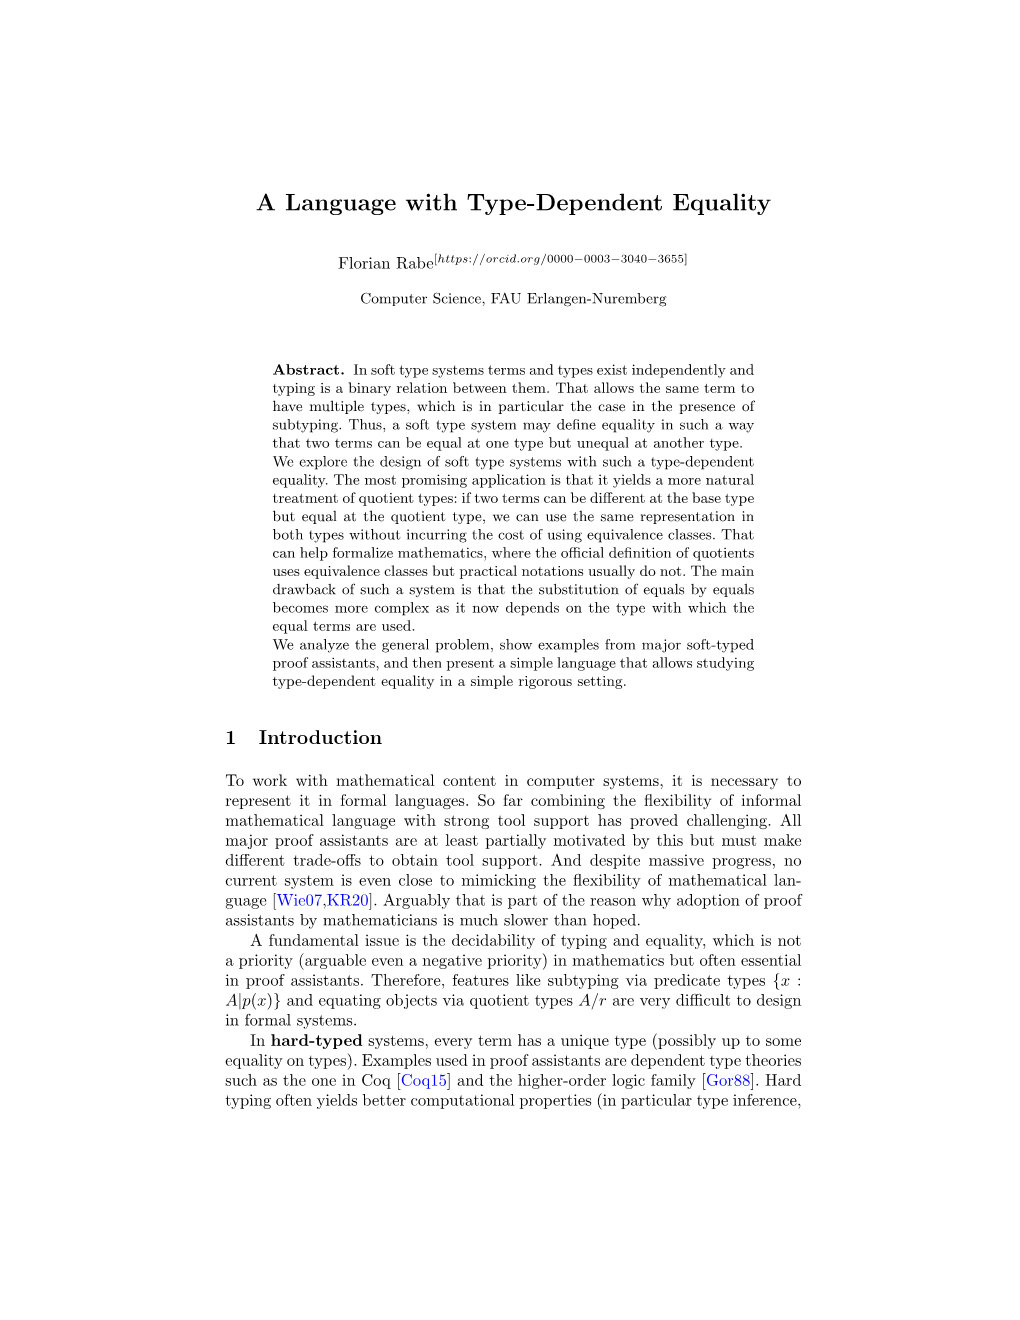 A Language with Type-Dependent Equality